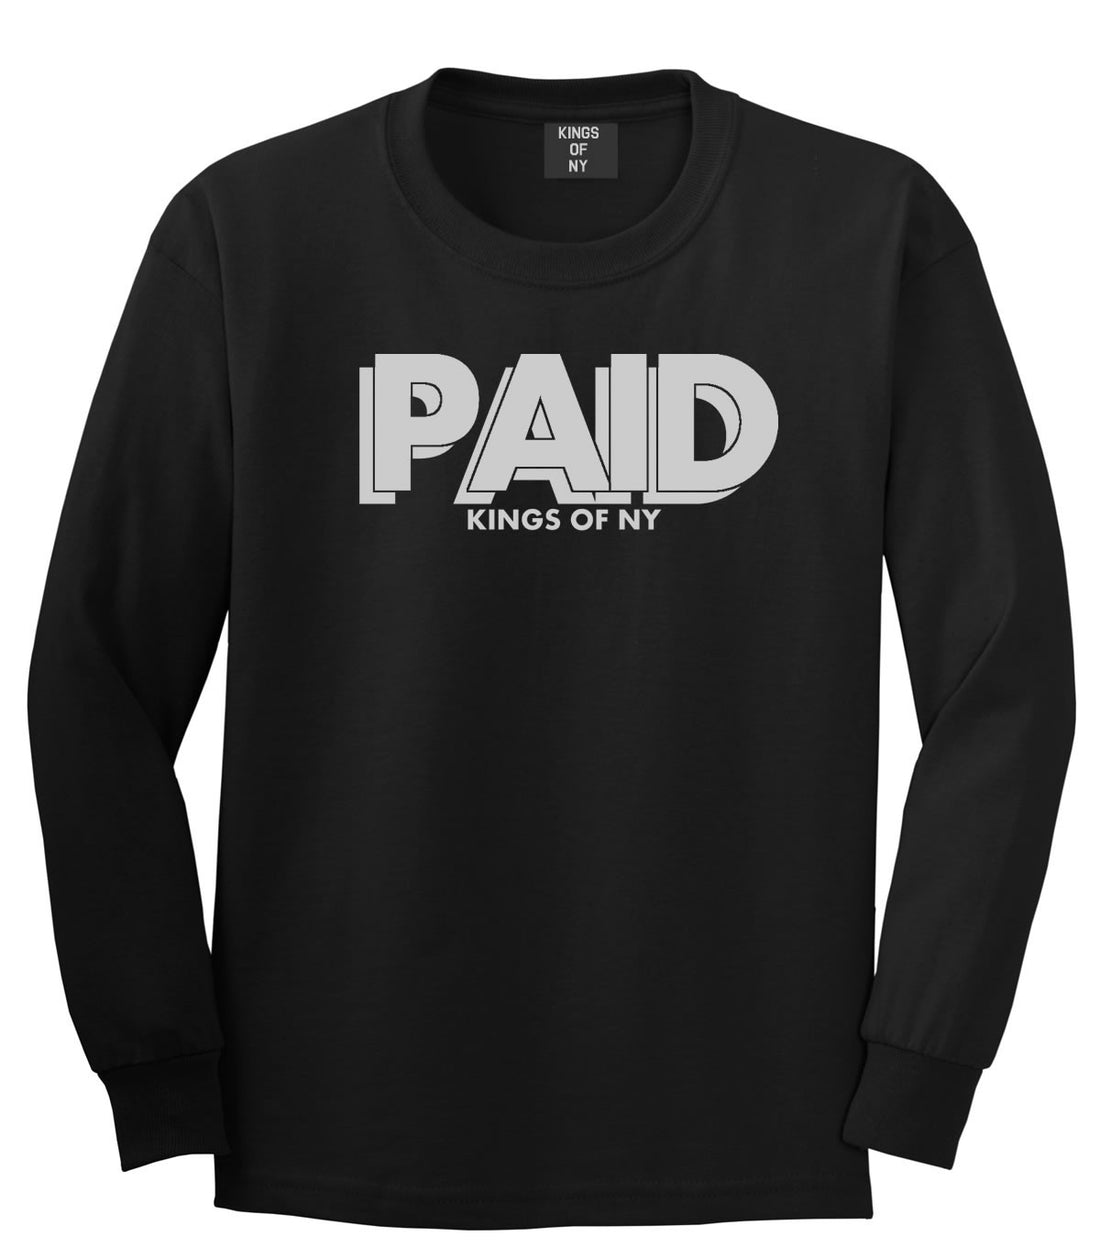 PAID Kings Of NY W15 Long Sleeve T-Shirt in Black By Kings Of NY